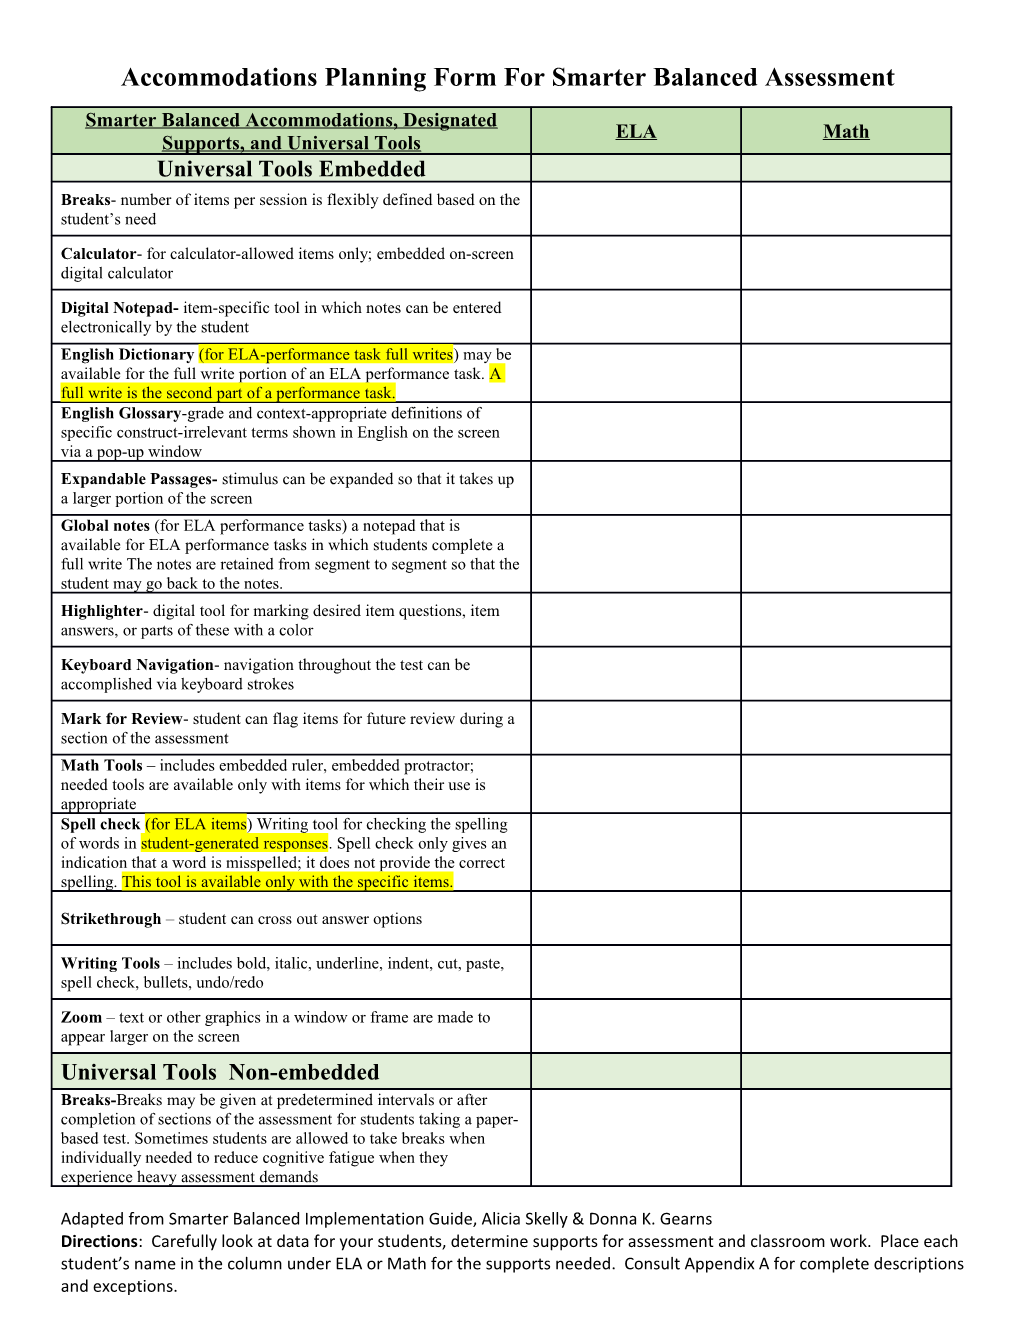 Accommodations Planning Form for Smarter Balanced Assessment